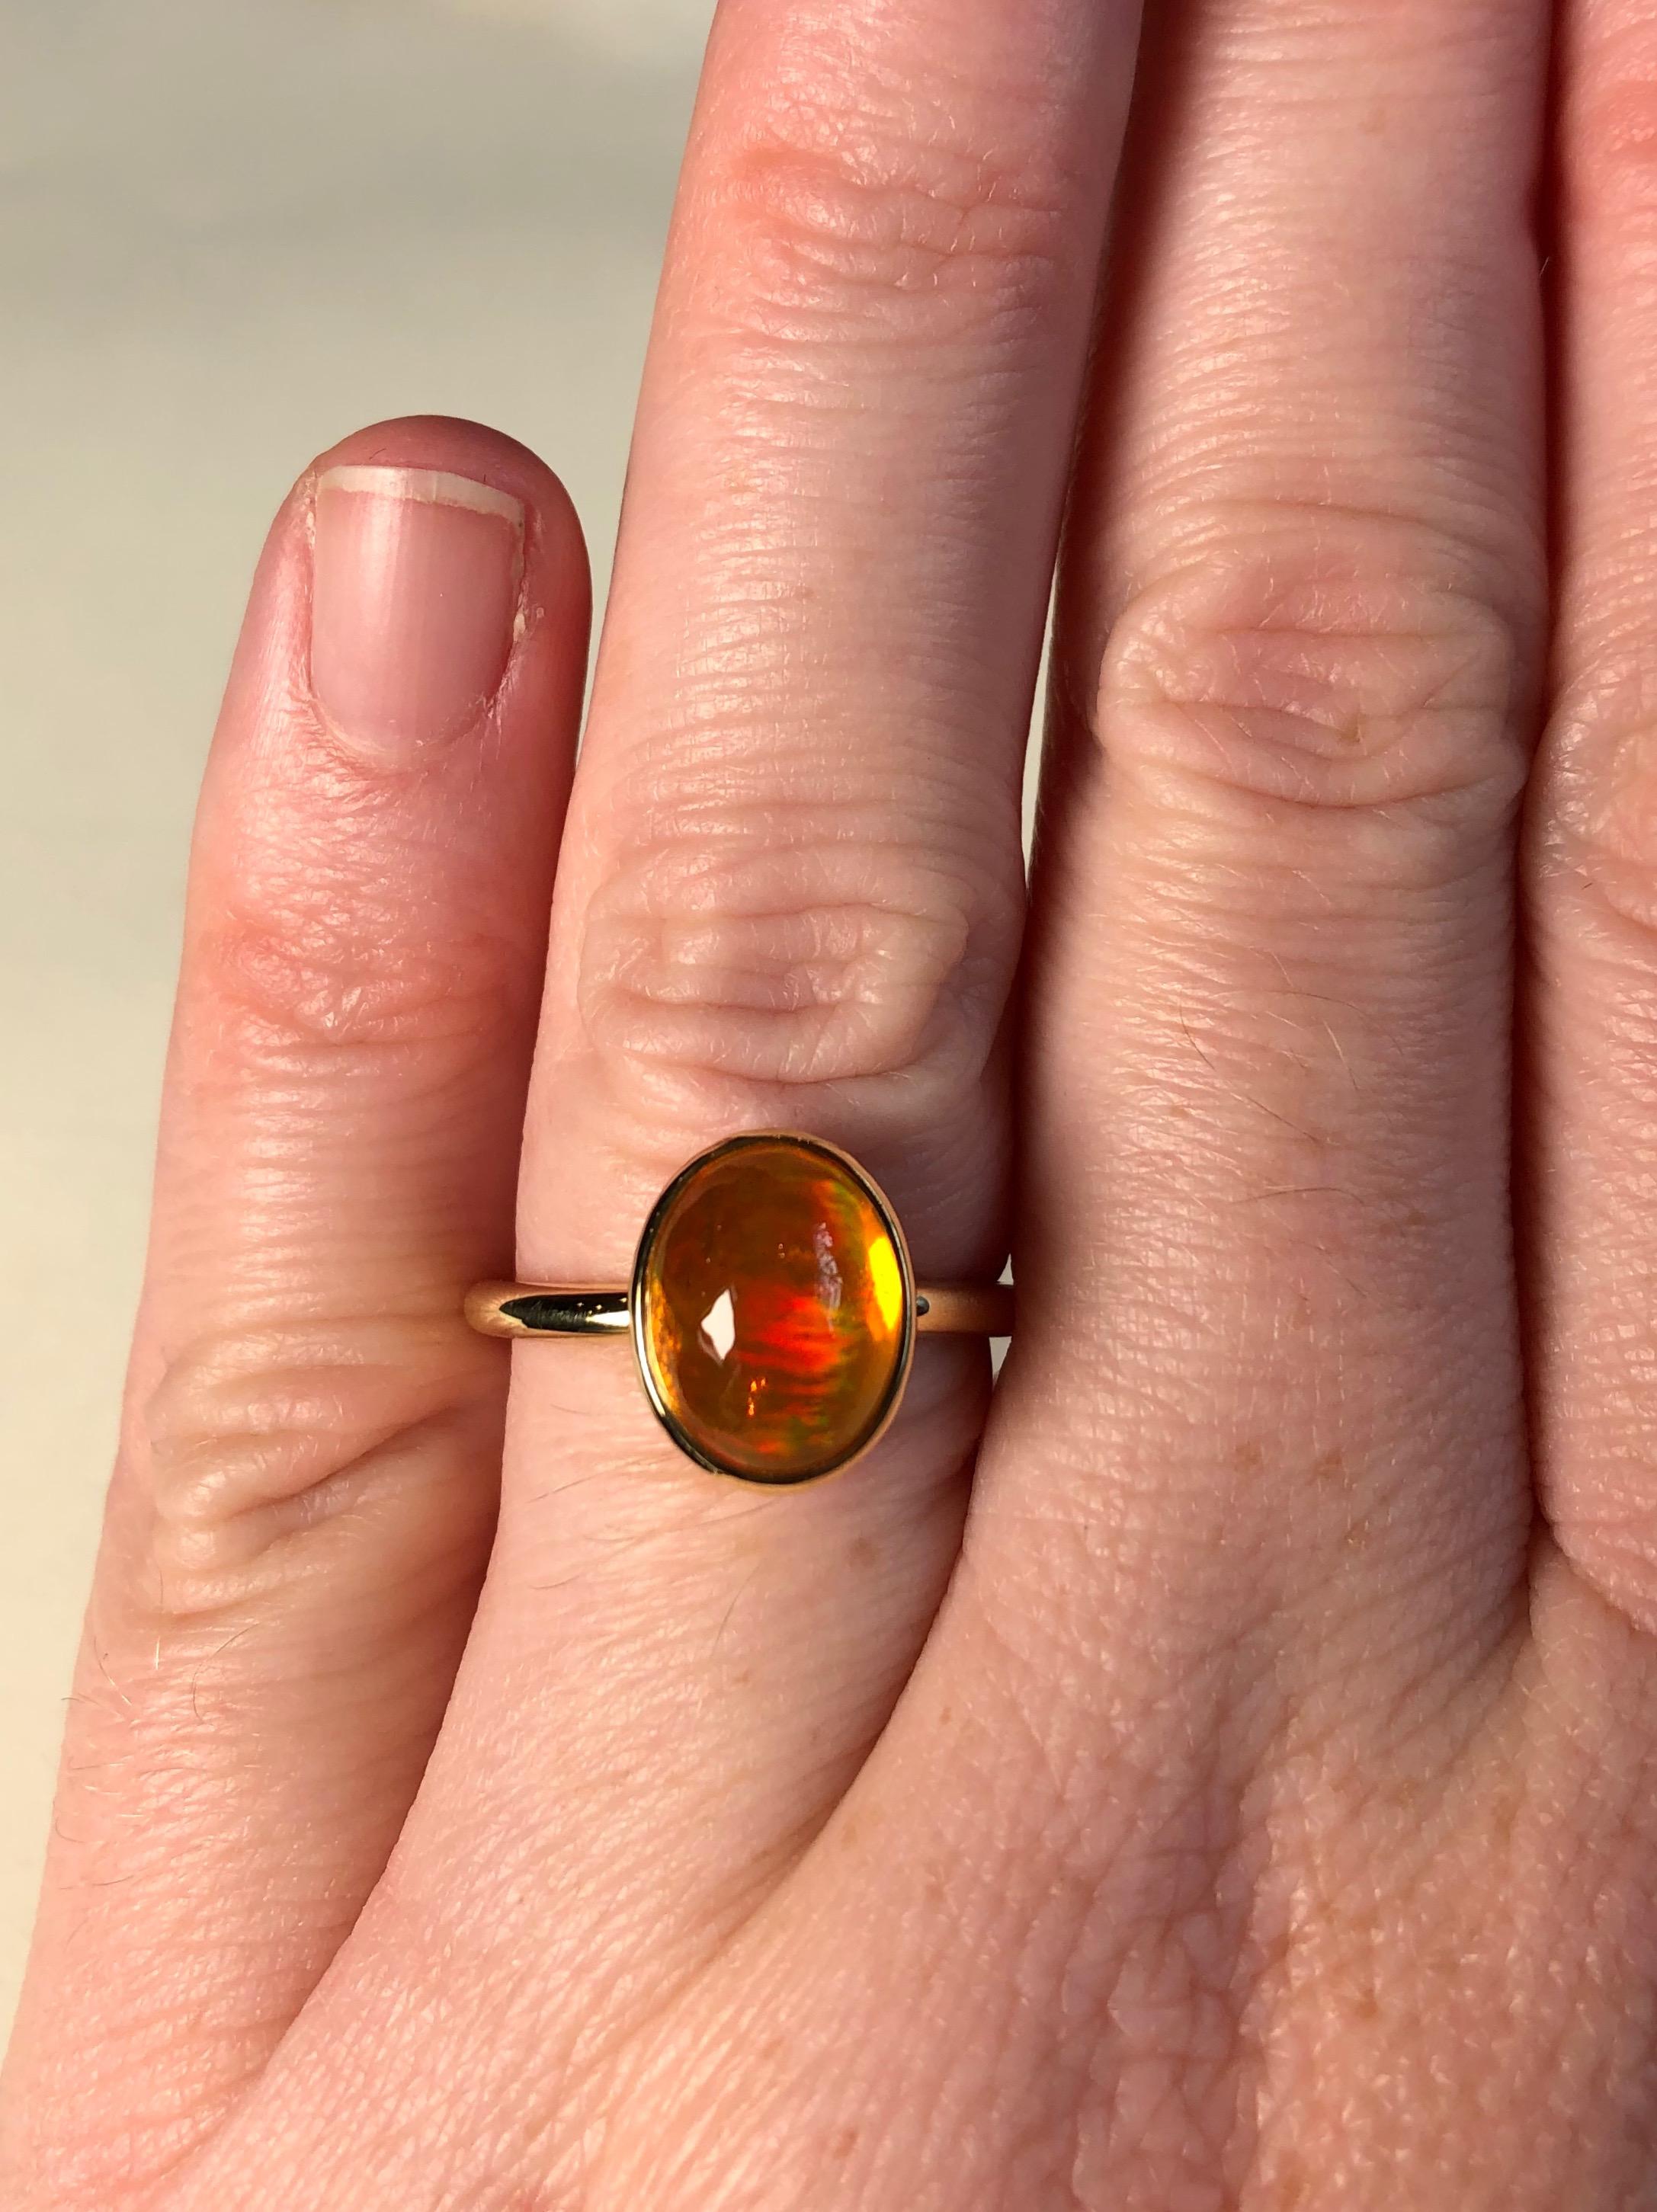 Performs miraculously in every light with incredible depth of color. Exceptional 3.01 carat Mexican fire opal, ethically sourced and hand fabricated in 100% 18 karat recycled gold 18. Part of our baroque gem collection. Polished shank, hand hammered